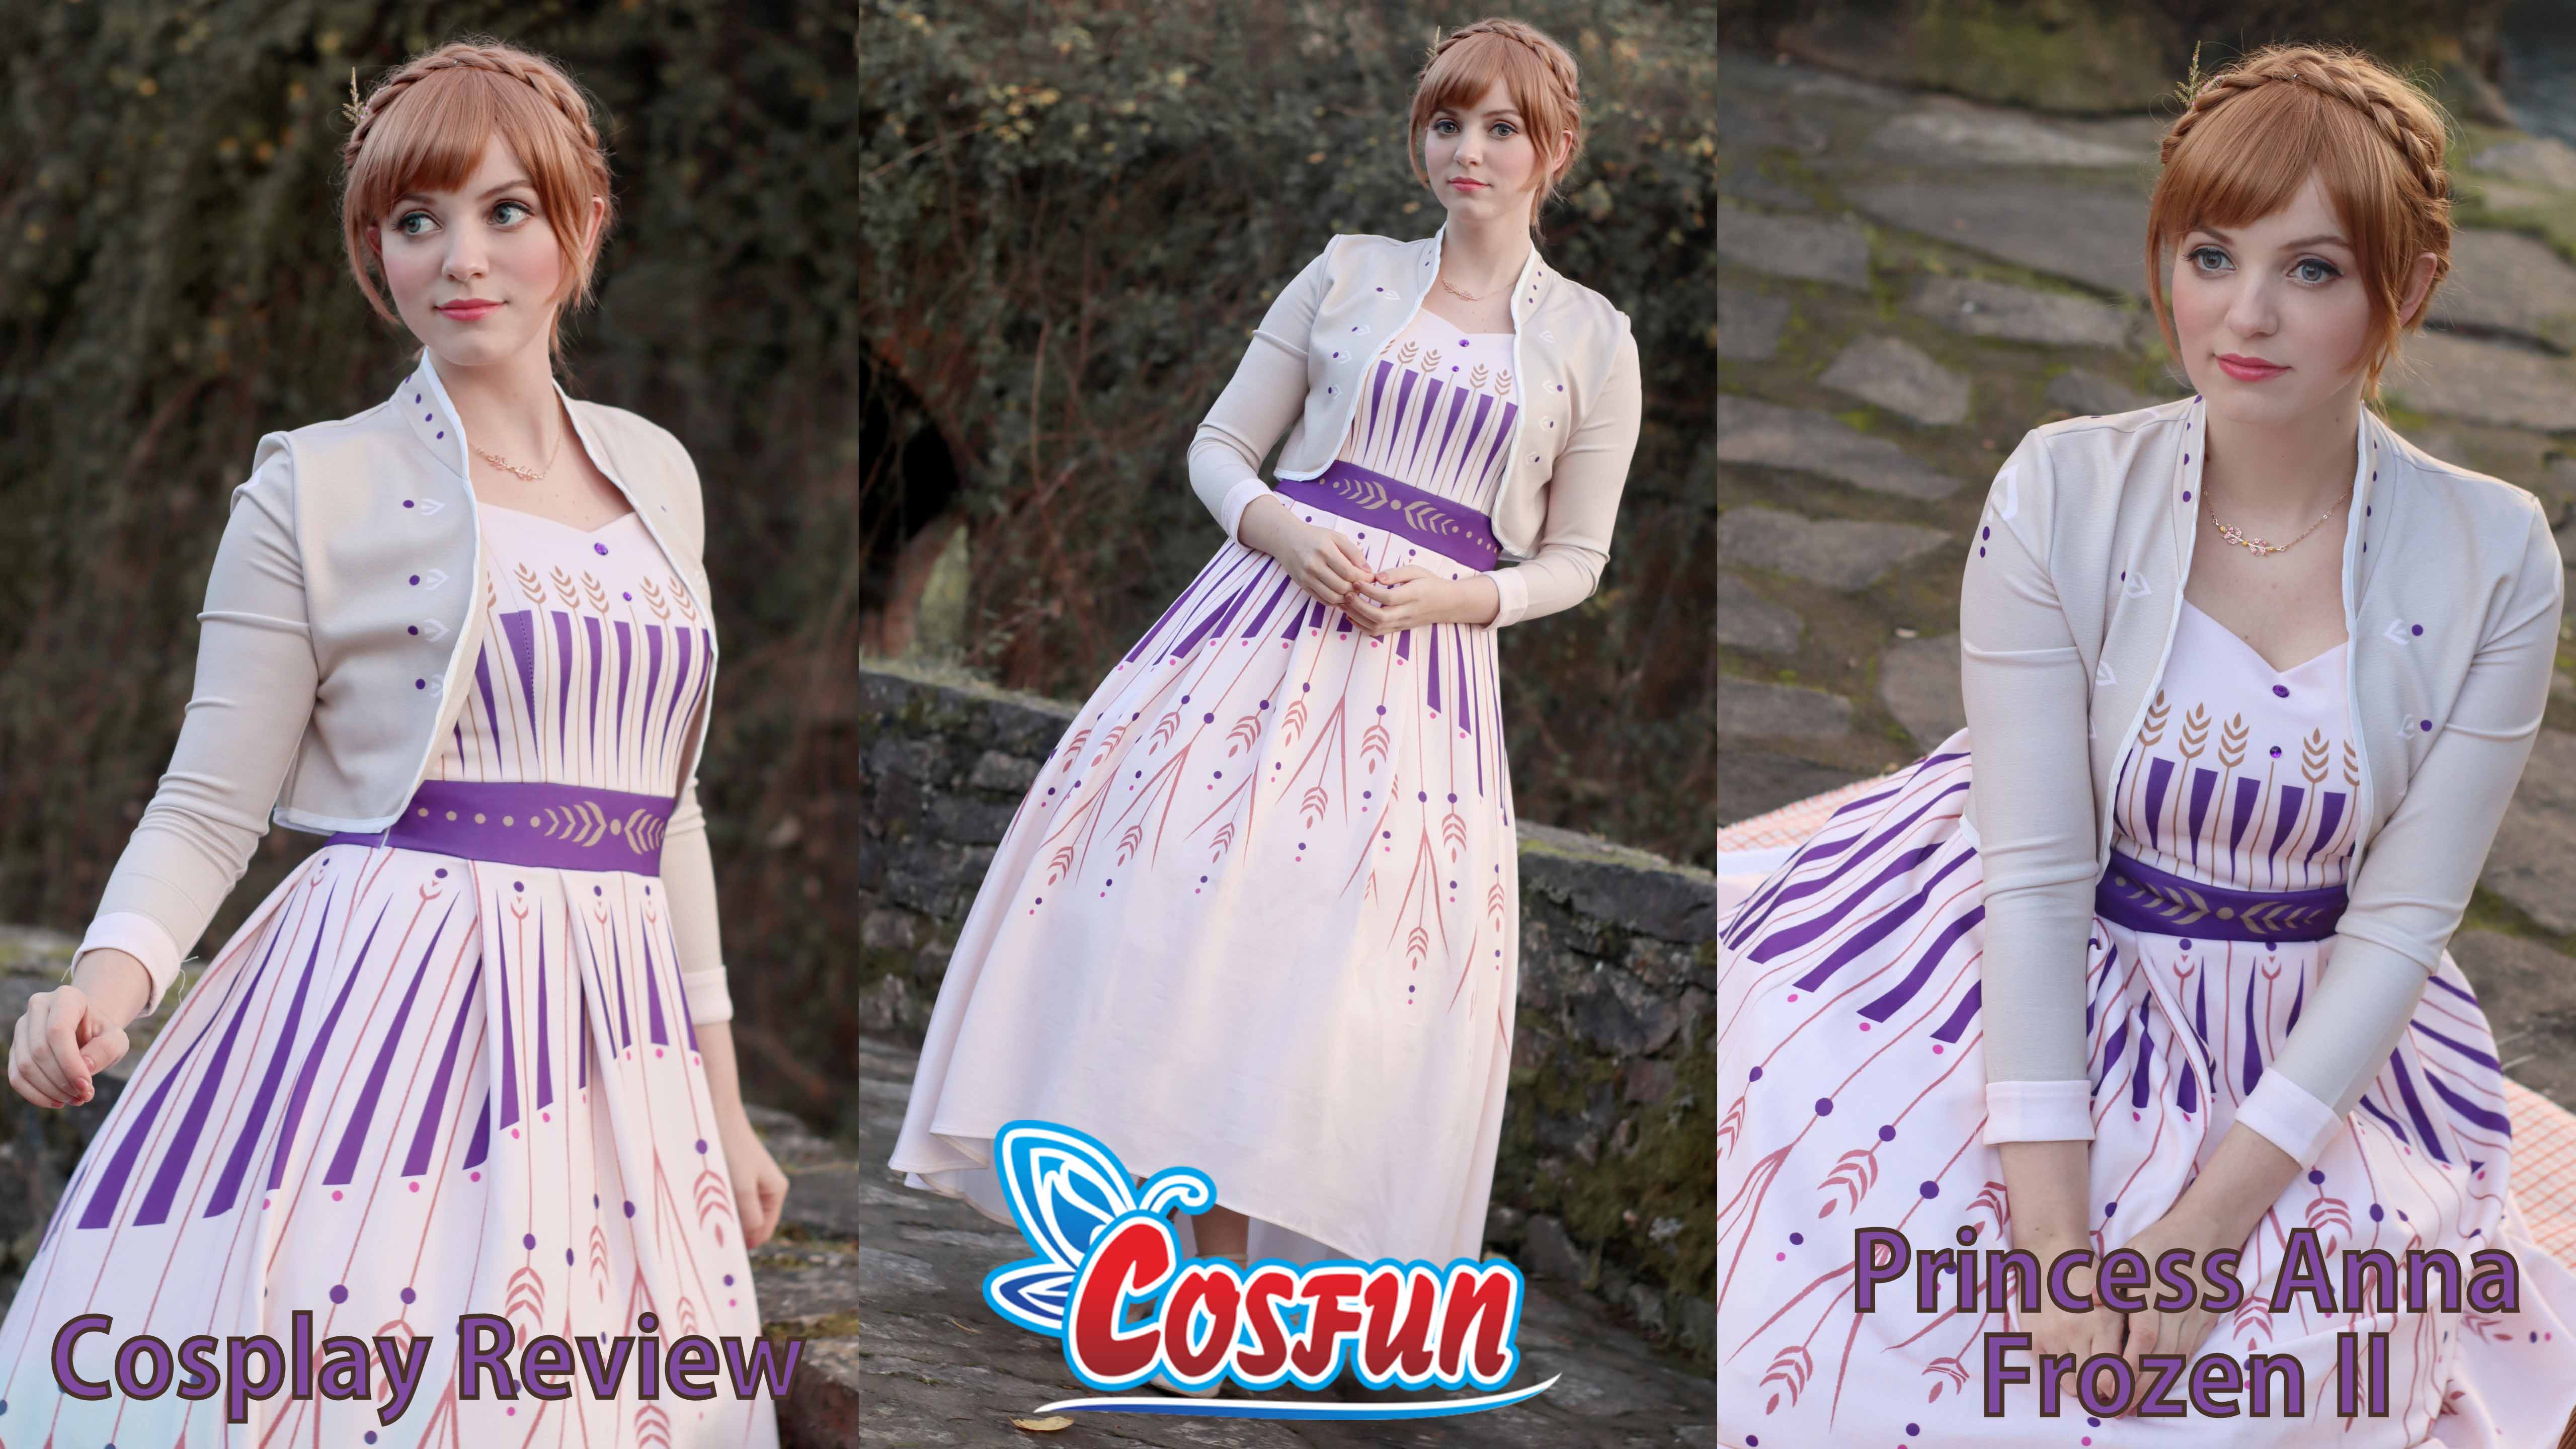 Cosplay Review: Princess Anna (Frozen II) from Cosfun